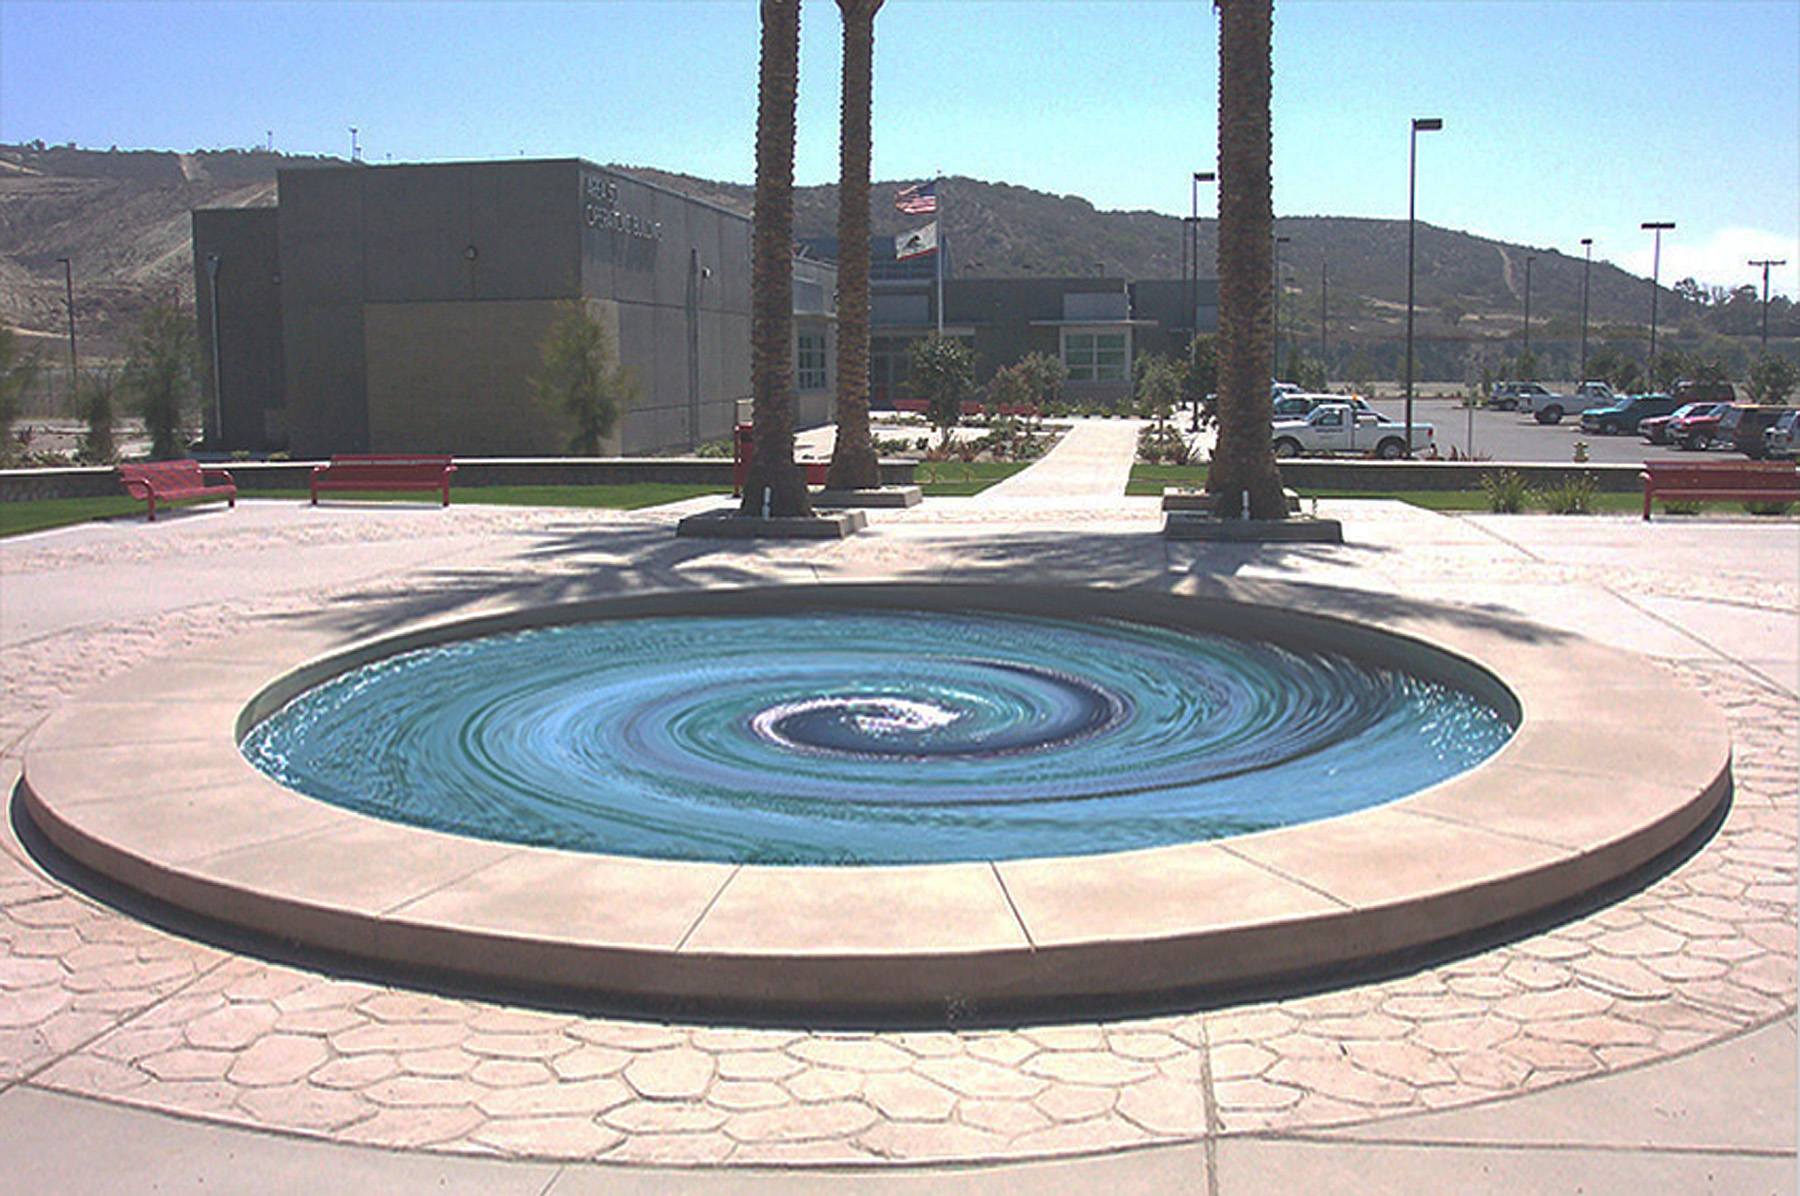 Vortex - South Bay Water Reclamation Plant